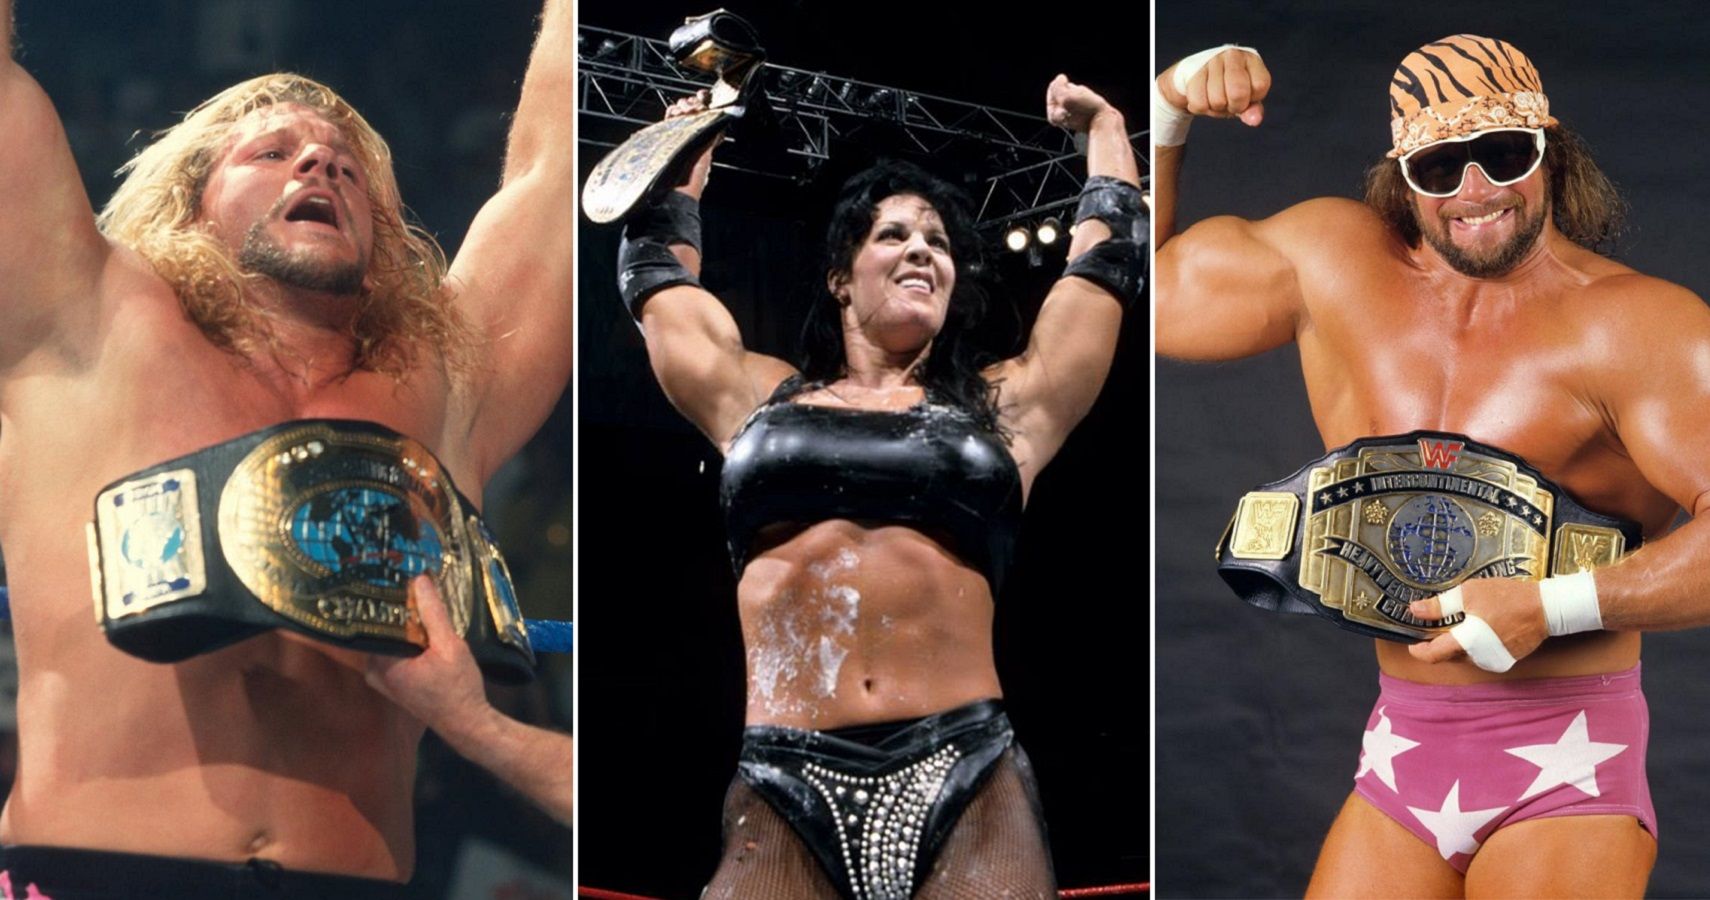 10 Things You Didn't Know About The Intercontinental Championship